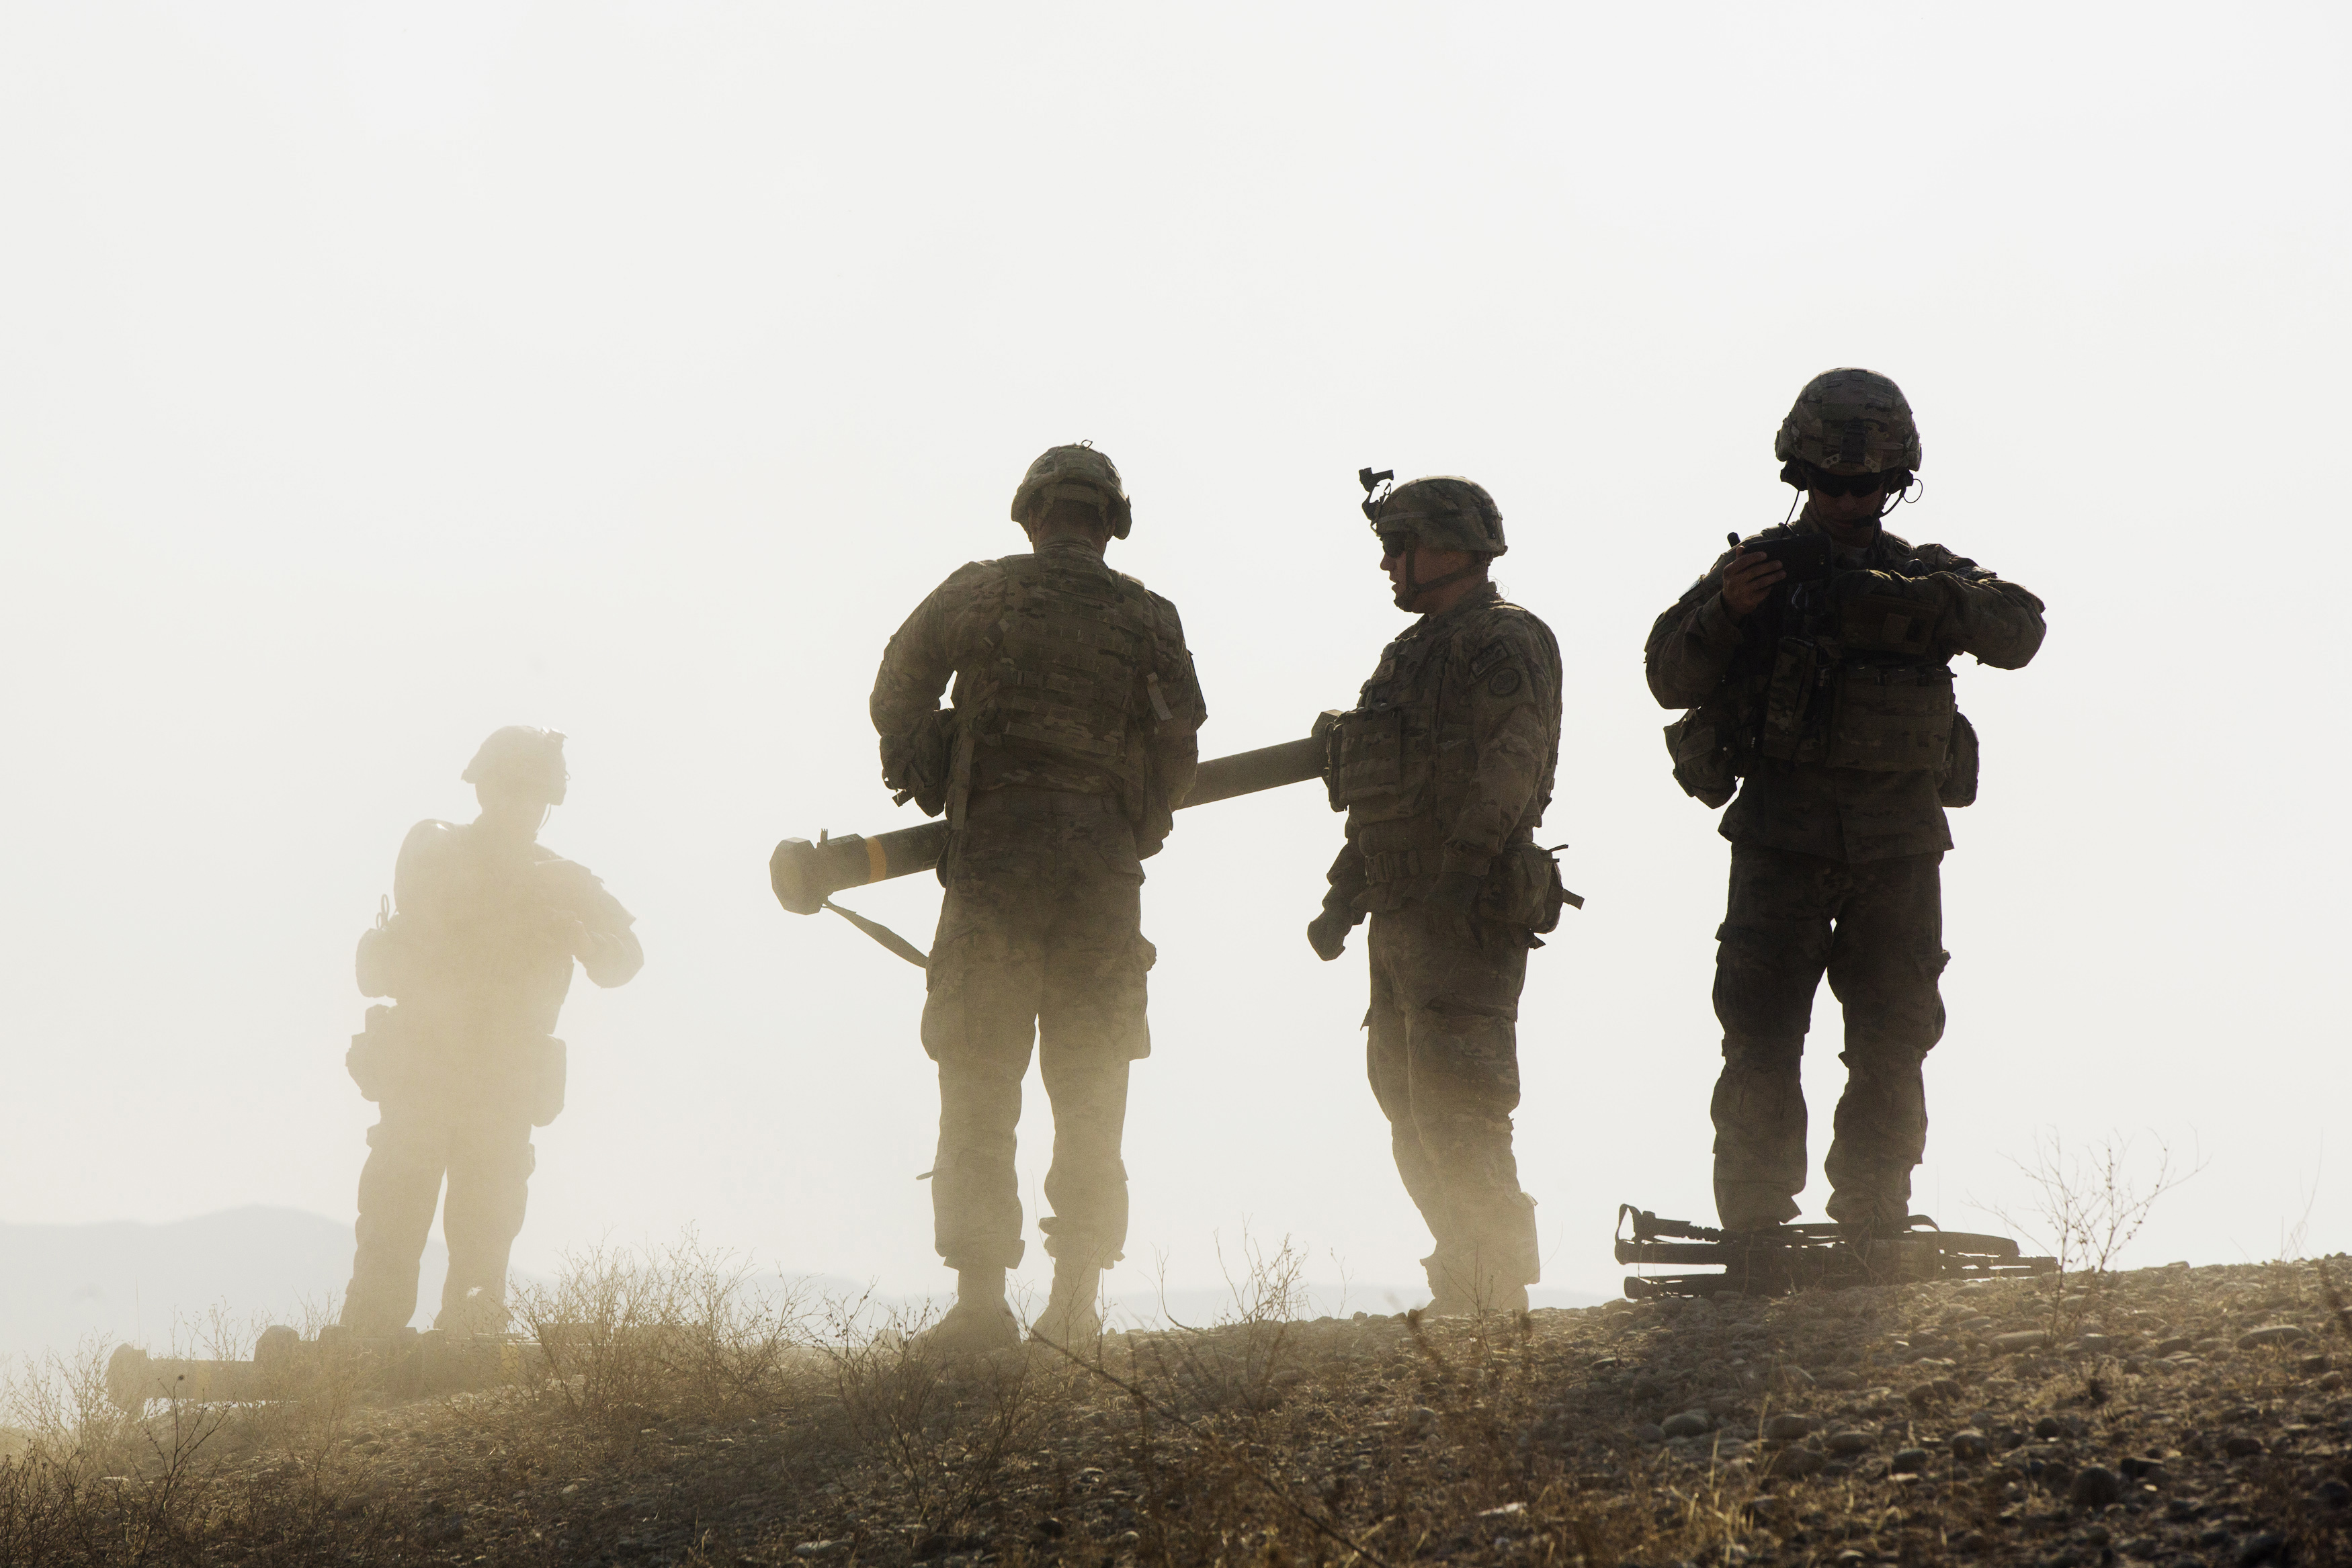 U.S. soldiers from D Troop of the 3rd Cavalry Regiment walk on a hill after finishing with a training exercise near forward operating base Gamberi in the Laghman province of Afghanistan December 30, 2014. REUTERS/Lucas Jackson 